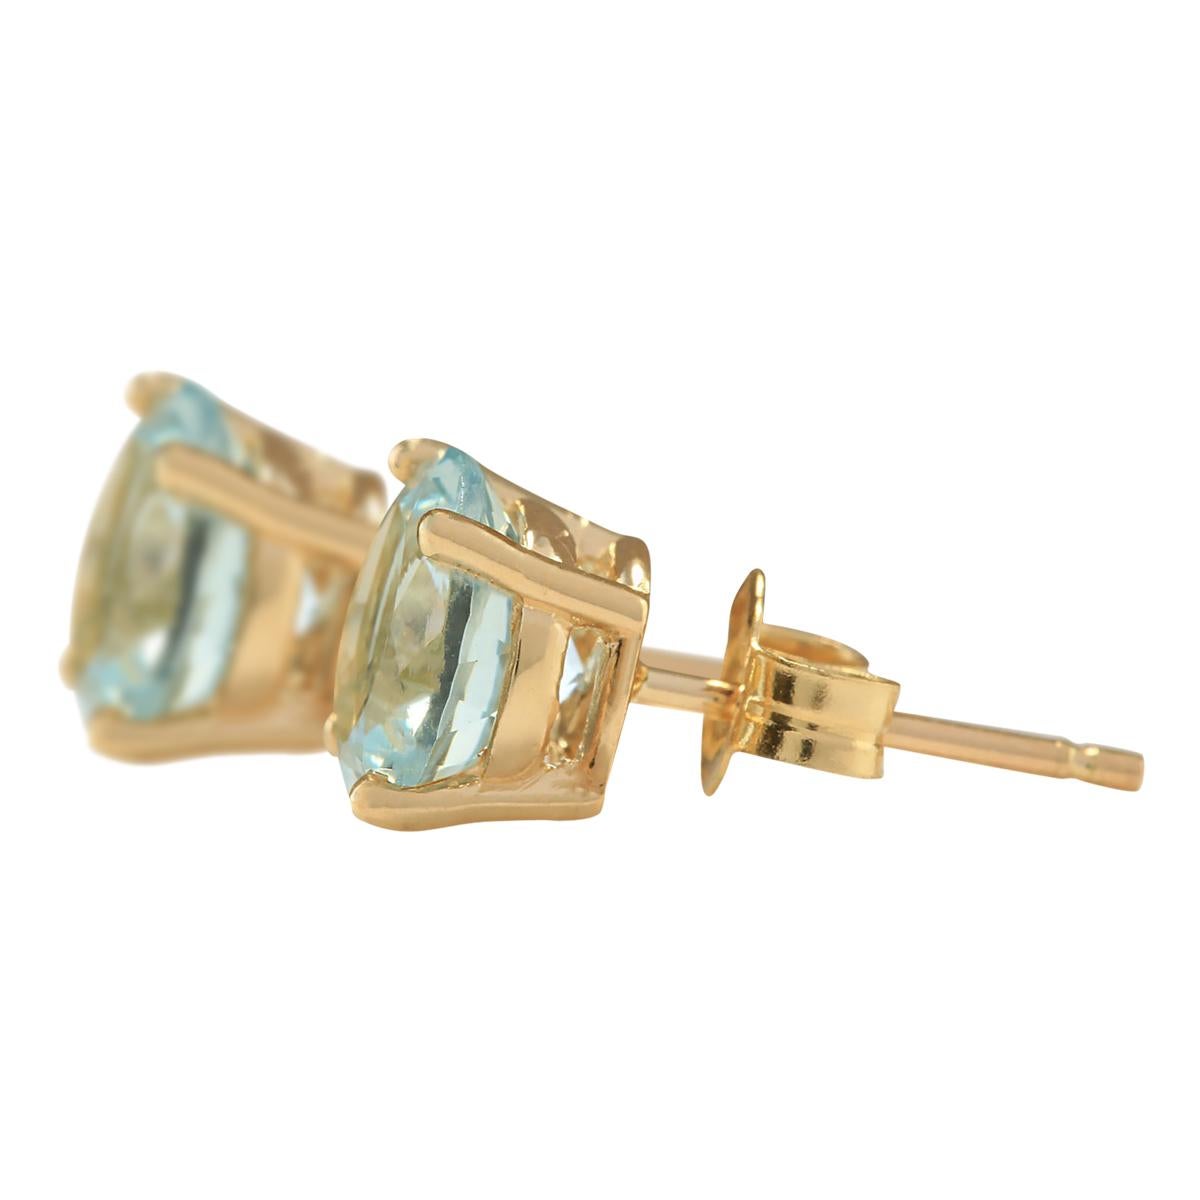 Introducing our exquisite 3.00 Carat Natural Aquamarine Earrings, crafted in 14K Yellow Gold. Each earring bears the authentic 14K stamp and weighs a total of 1.2 grams, ensuring both elegance and comfort. The mesmerizing aquamarine gemstones